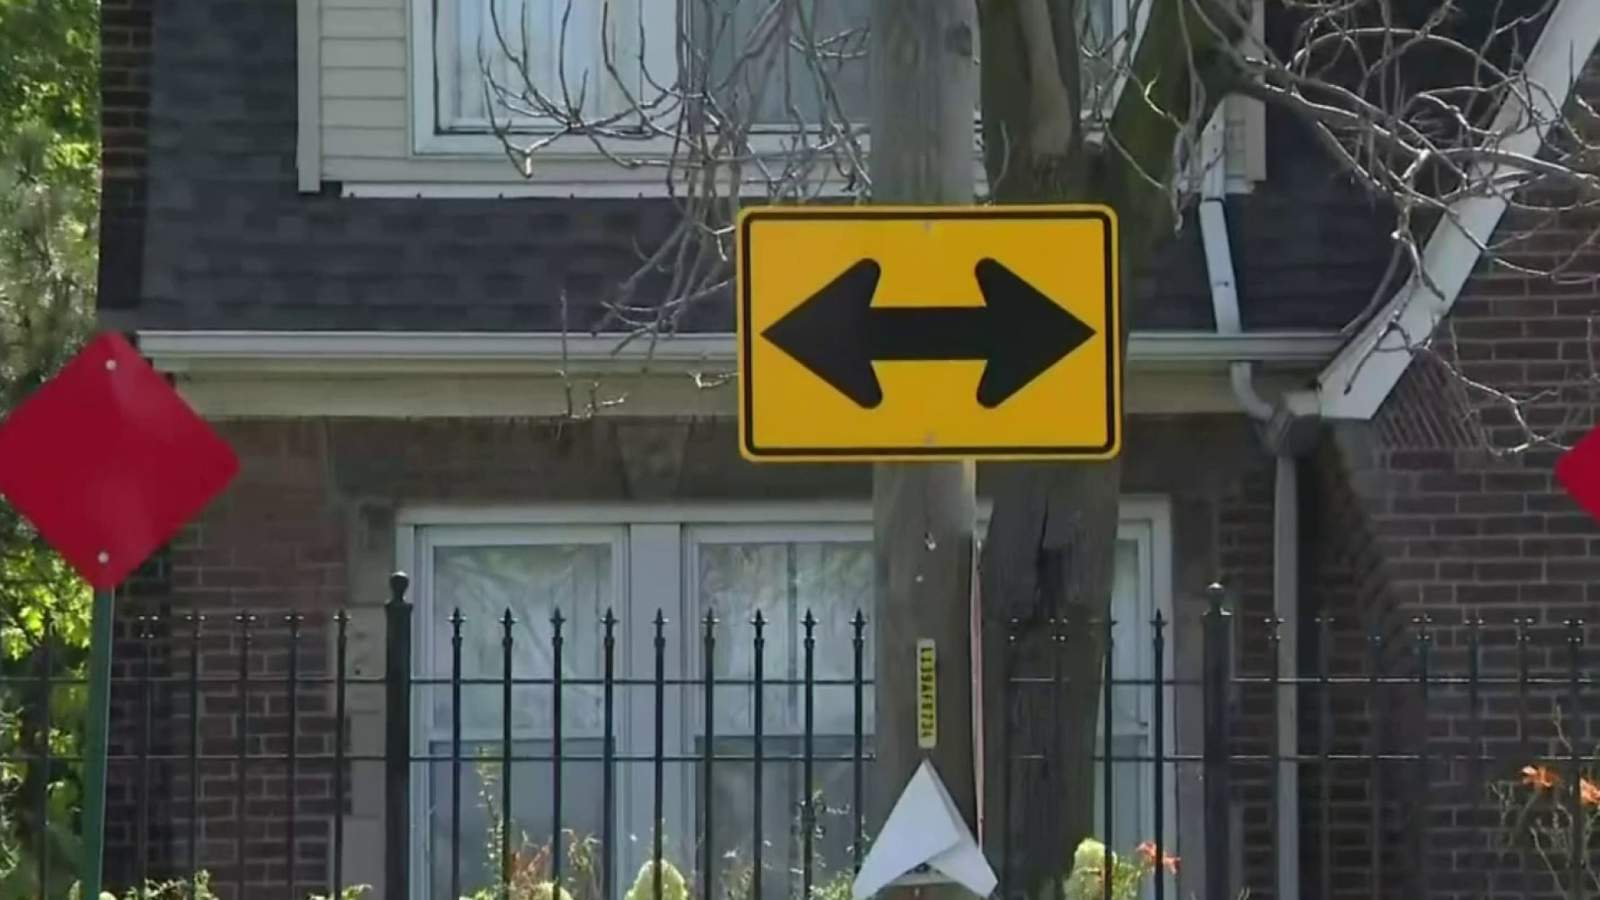 Family frustrated with drivers hitting property on Detroits west side